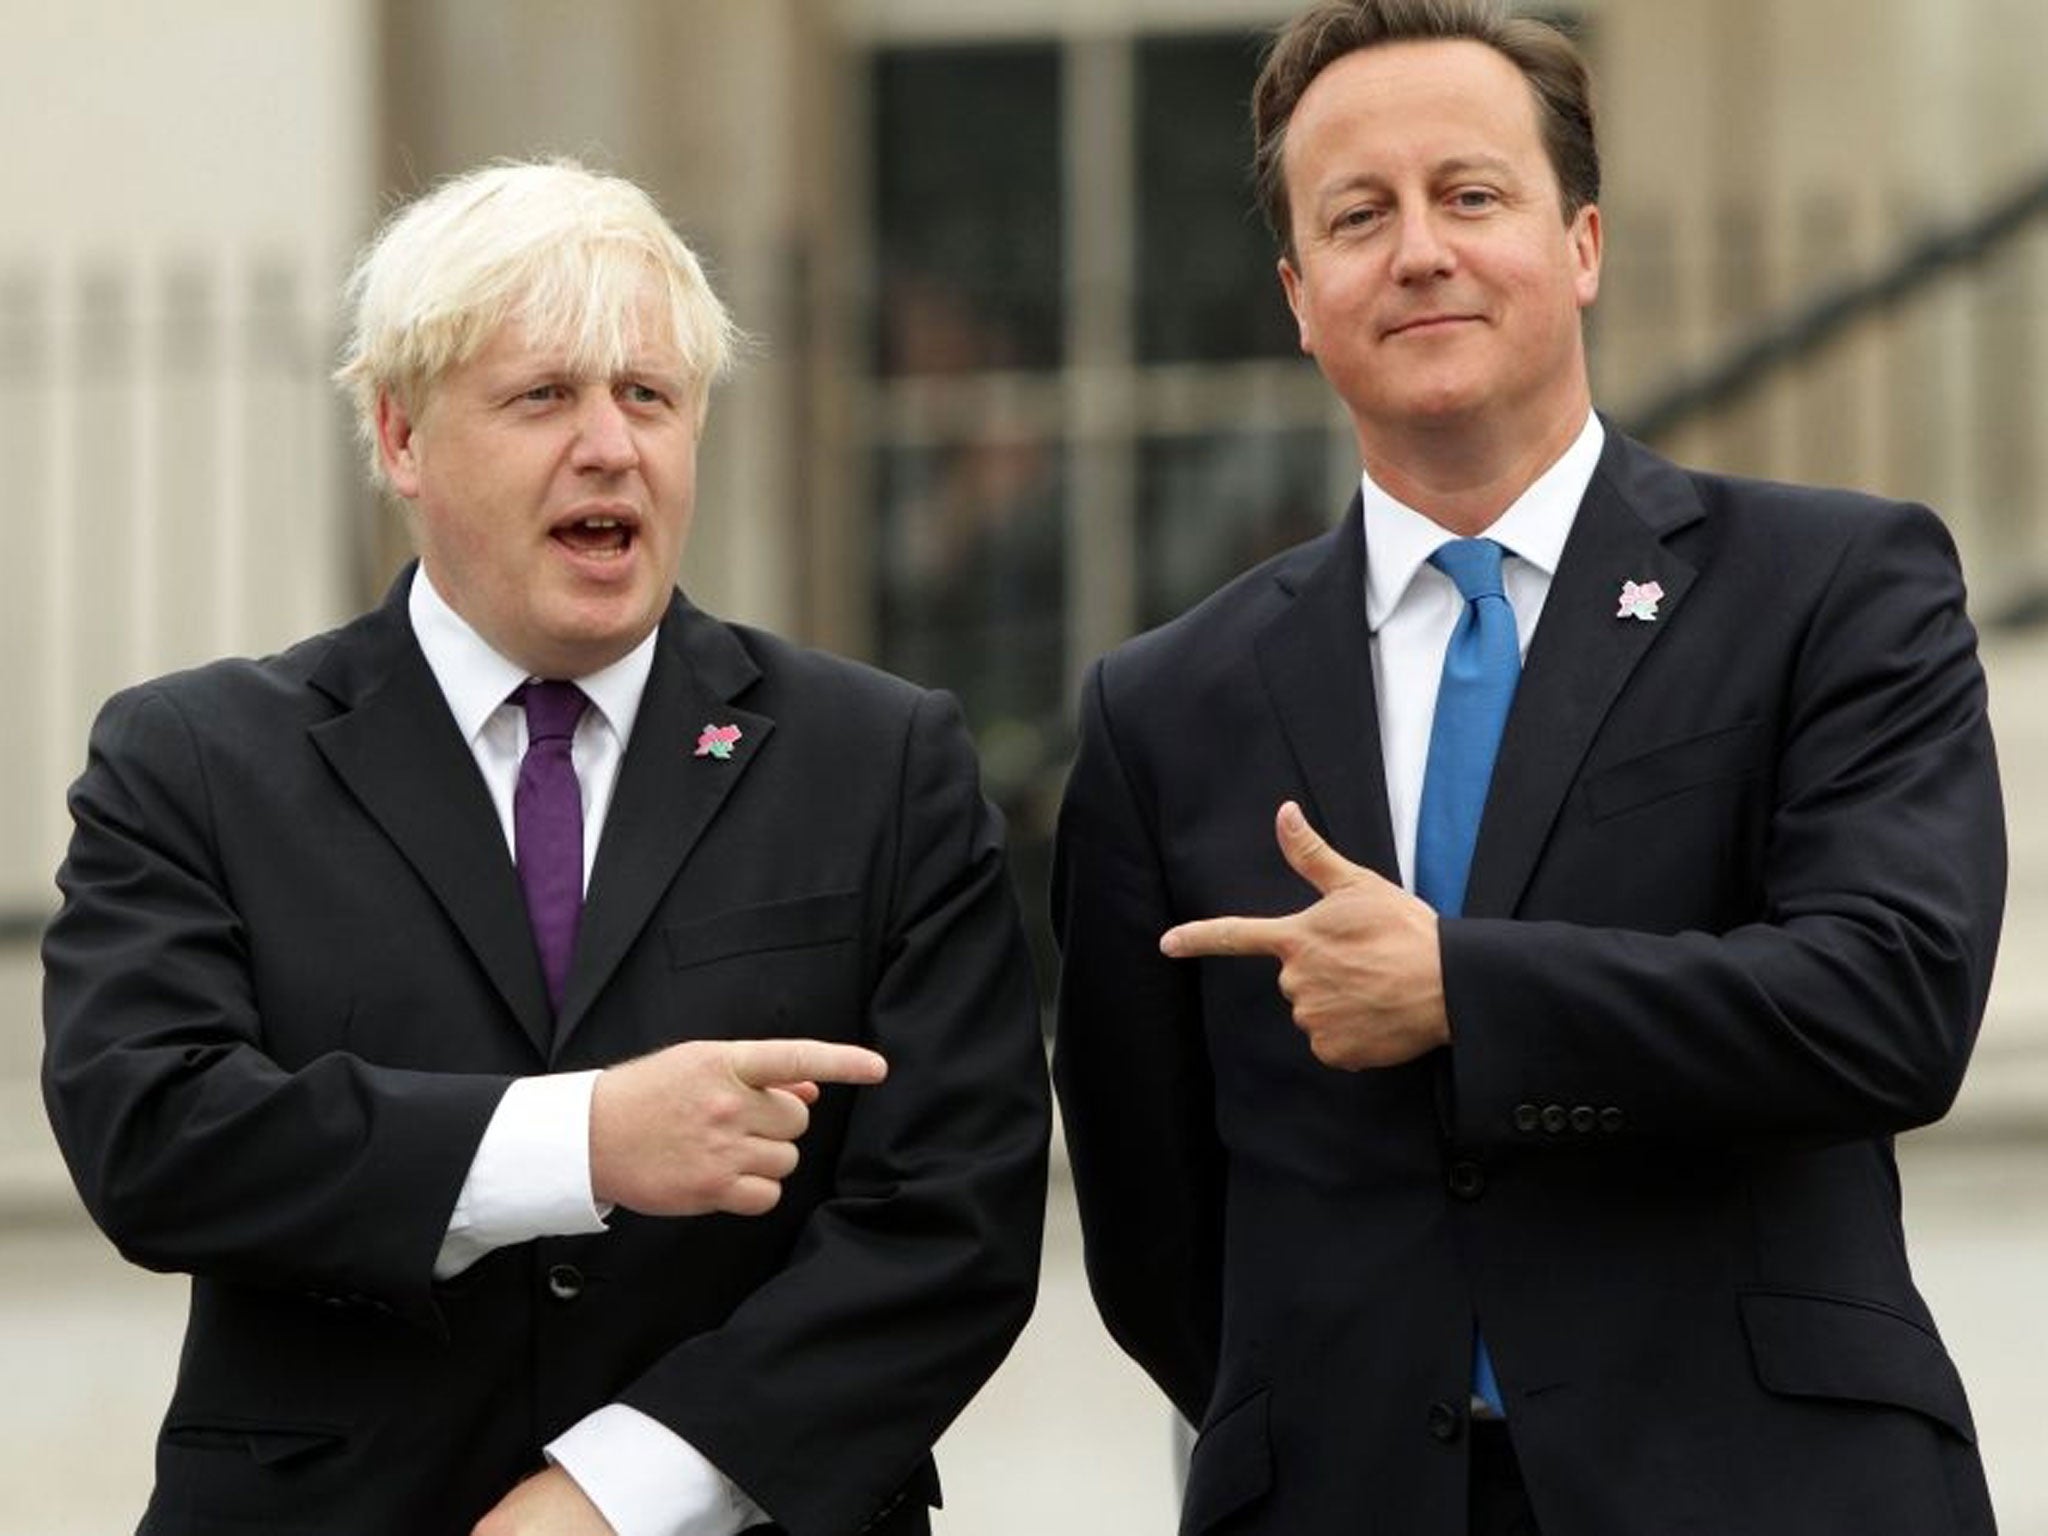 Boris Johnson (left) with Prime Minister David Cameron who has made a plea for the Mayor of London to return to Parliament and run in the next election.